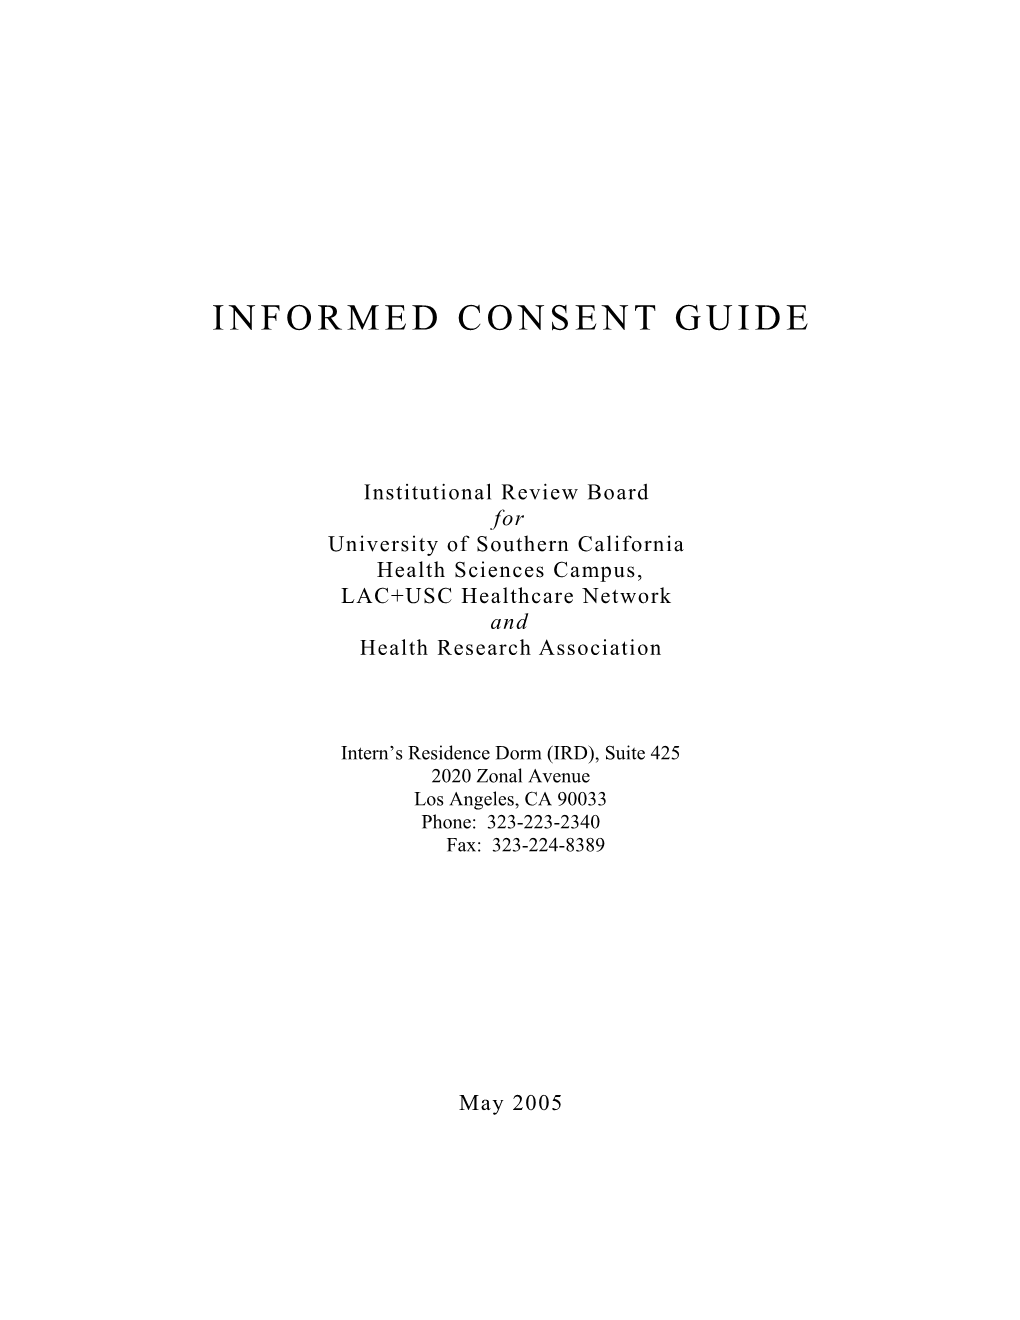 Informed Consent Requirements